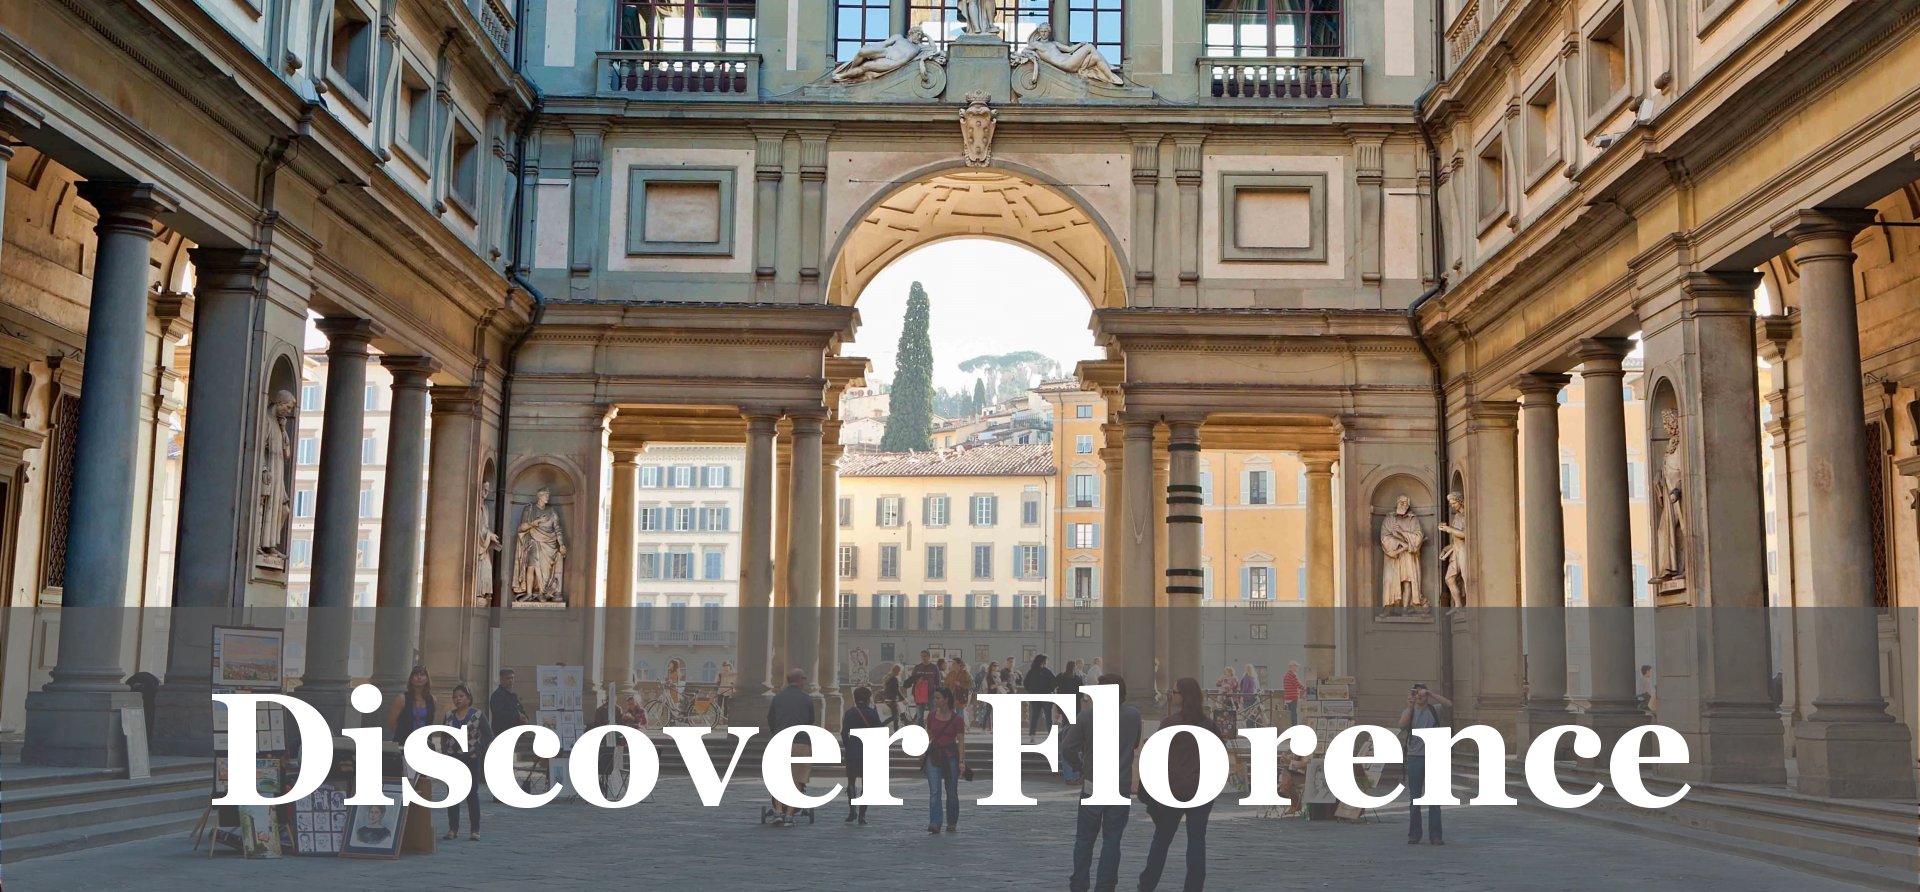 Discover Florence!